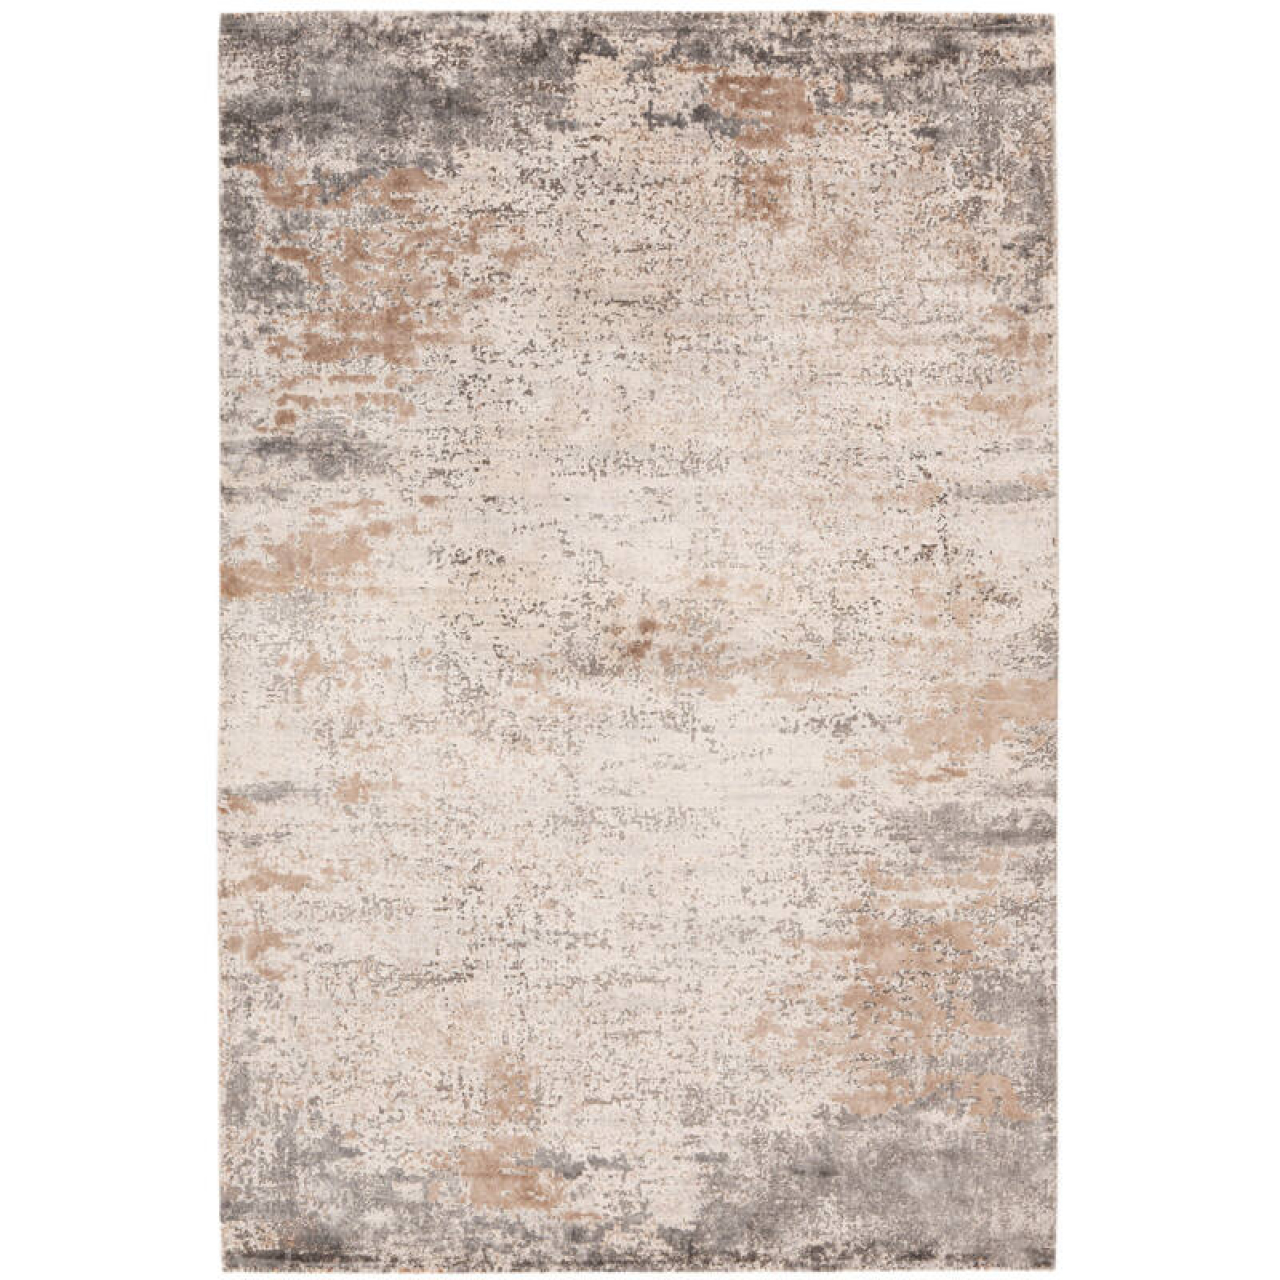 Obsession Haute Couture Jewel 953 Taupe szőnyeg-200x290